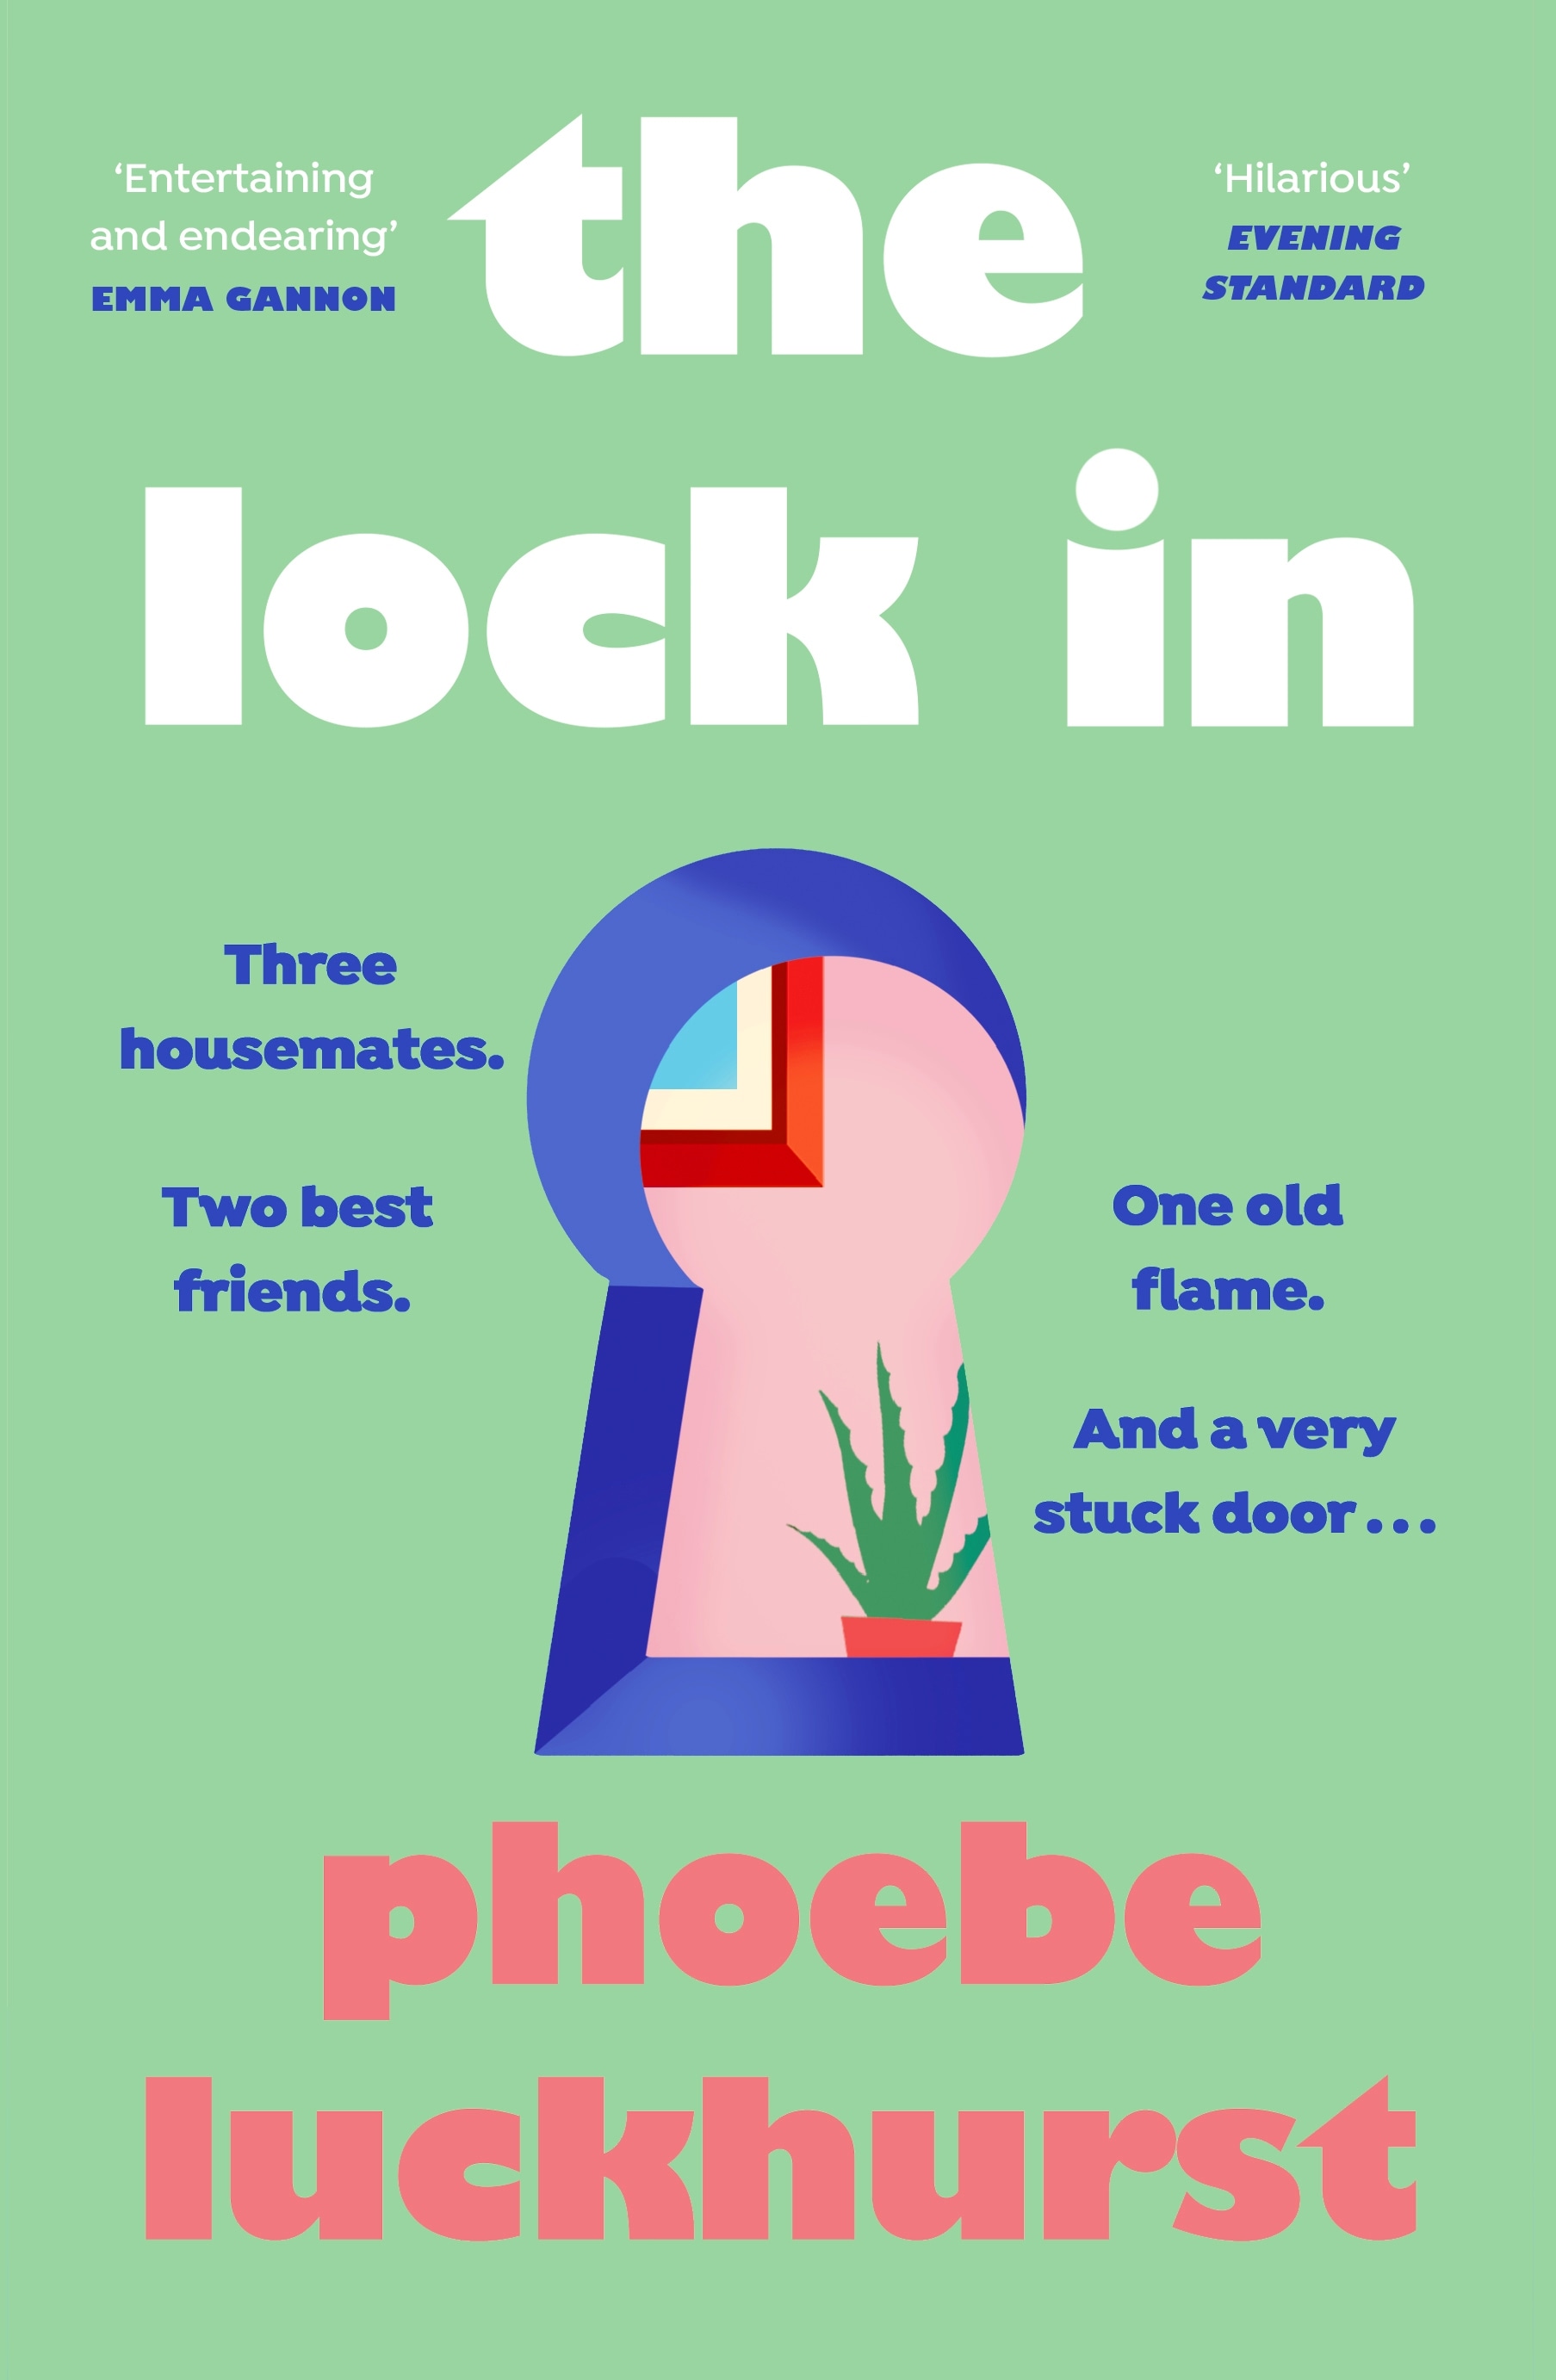 Book “The Lock In” by Phoebe Luckhurst — July 22, 2021